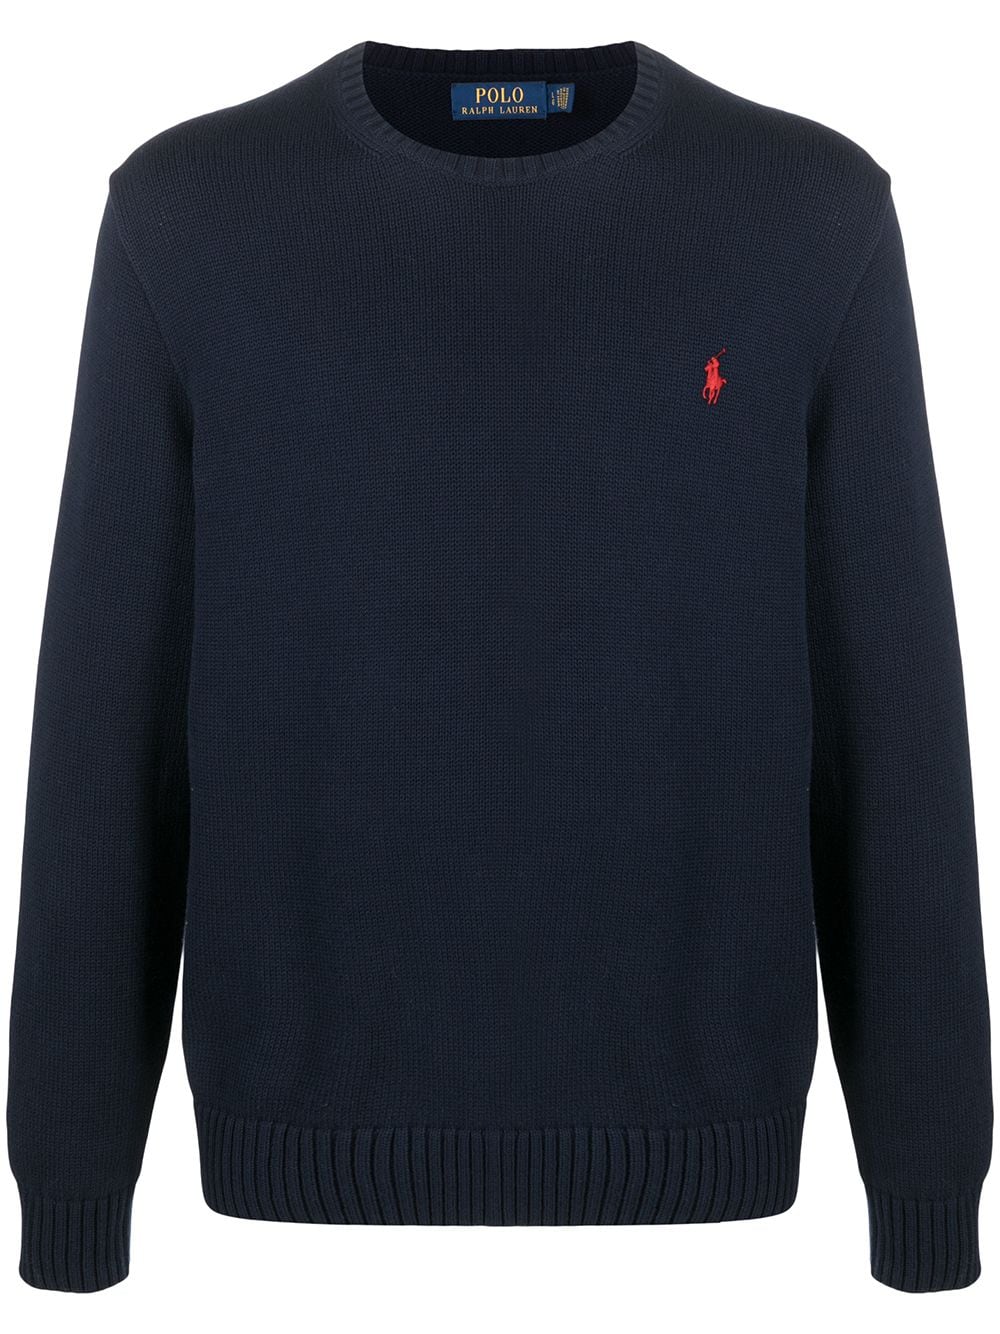 Polo Ralph Lauren Embroidered Logo Knitted Jumper - Farfetch